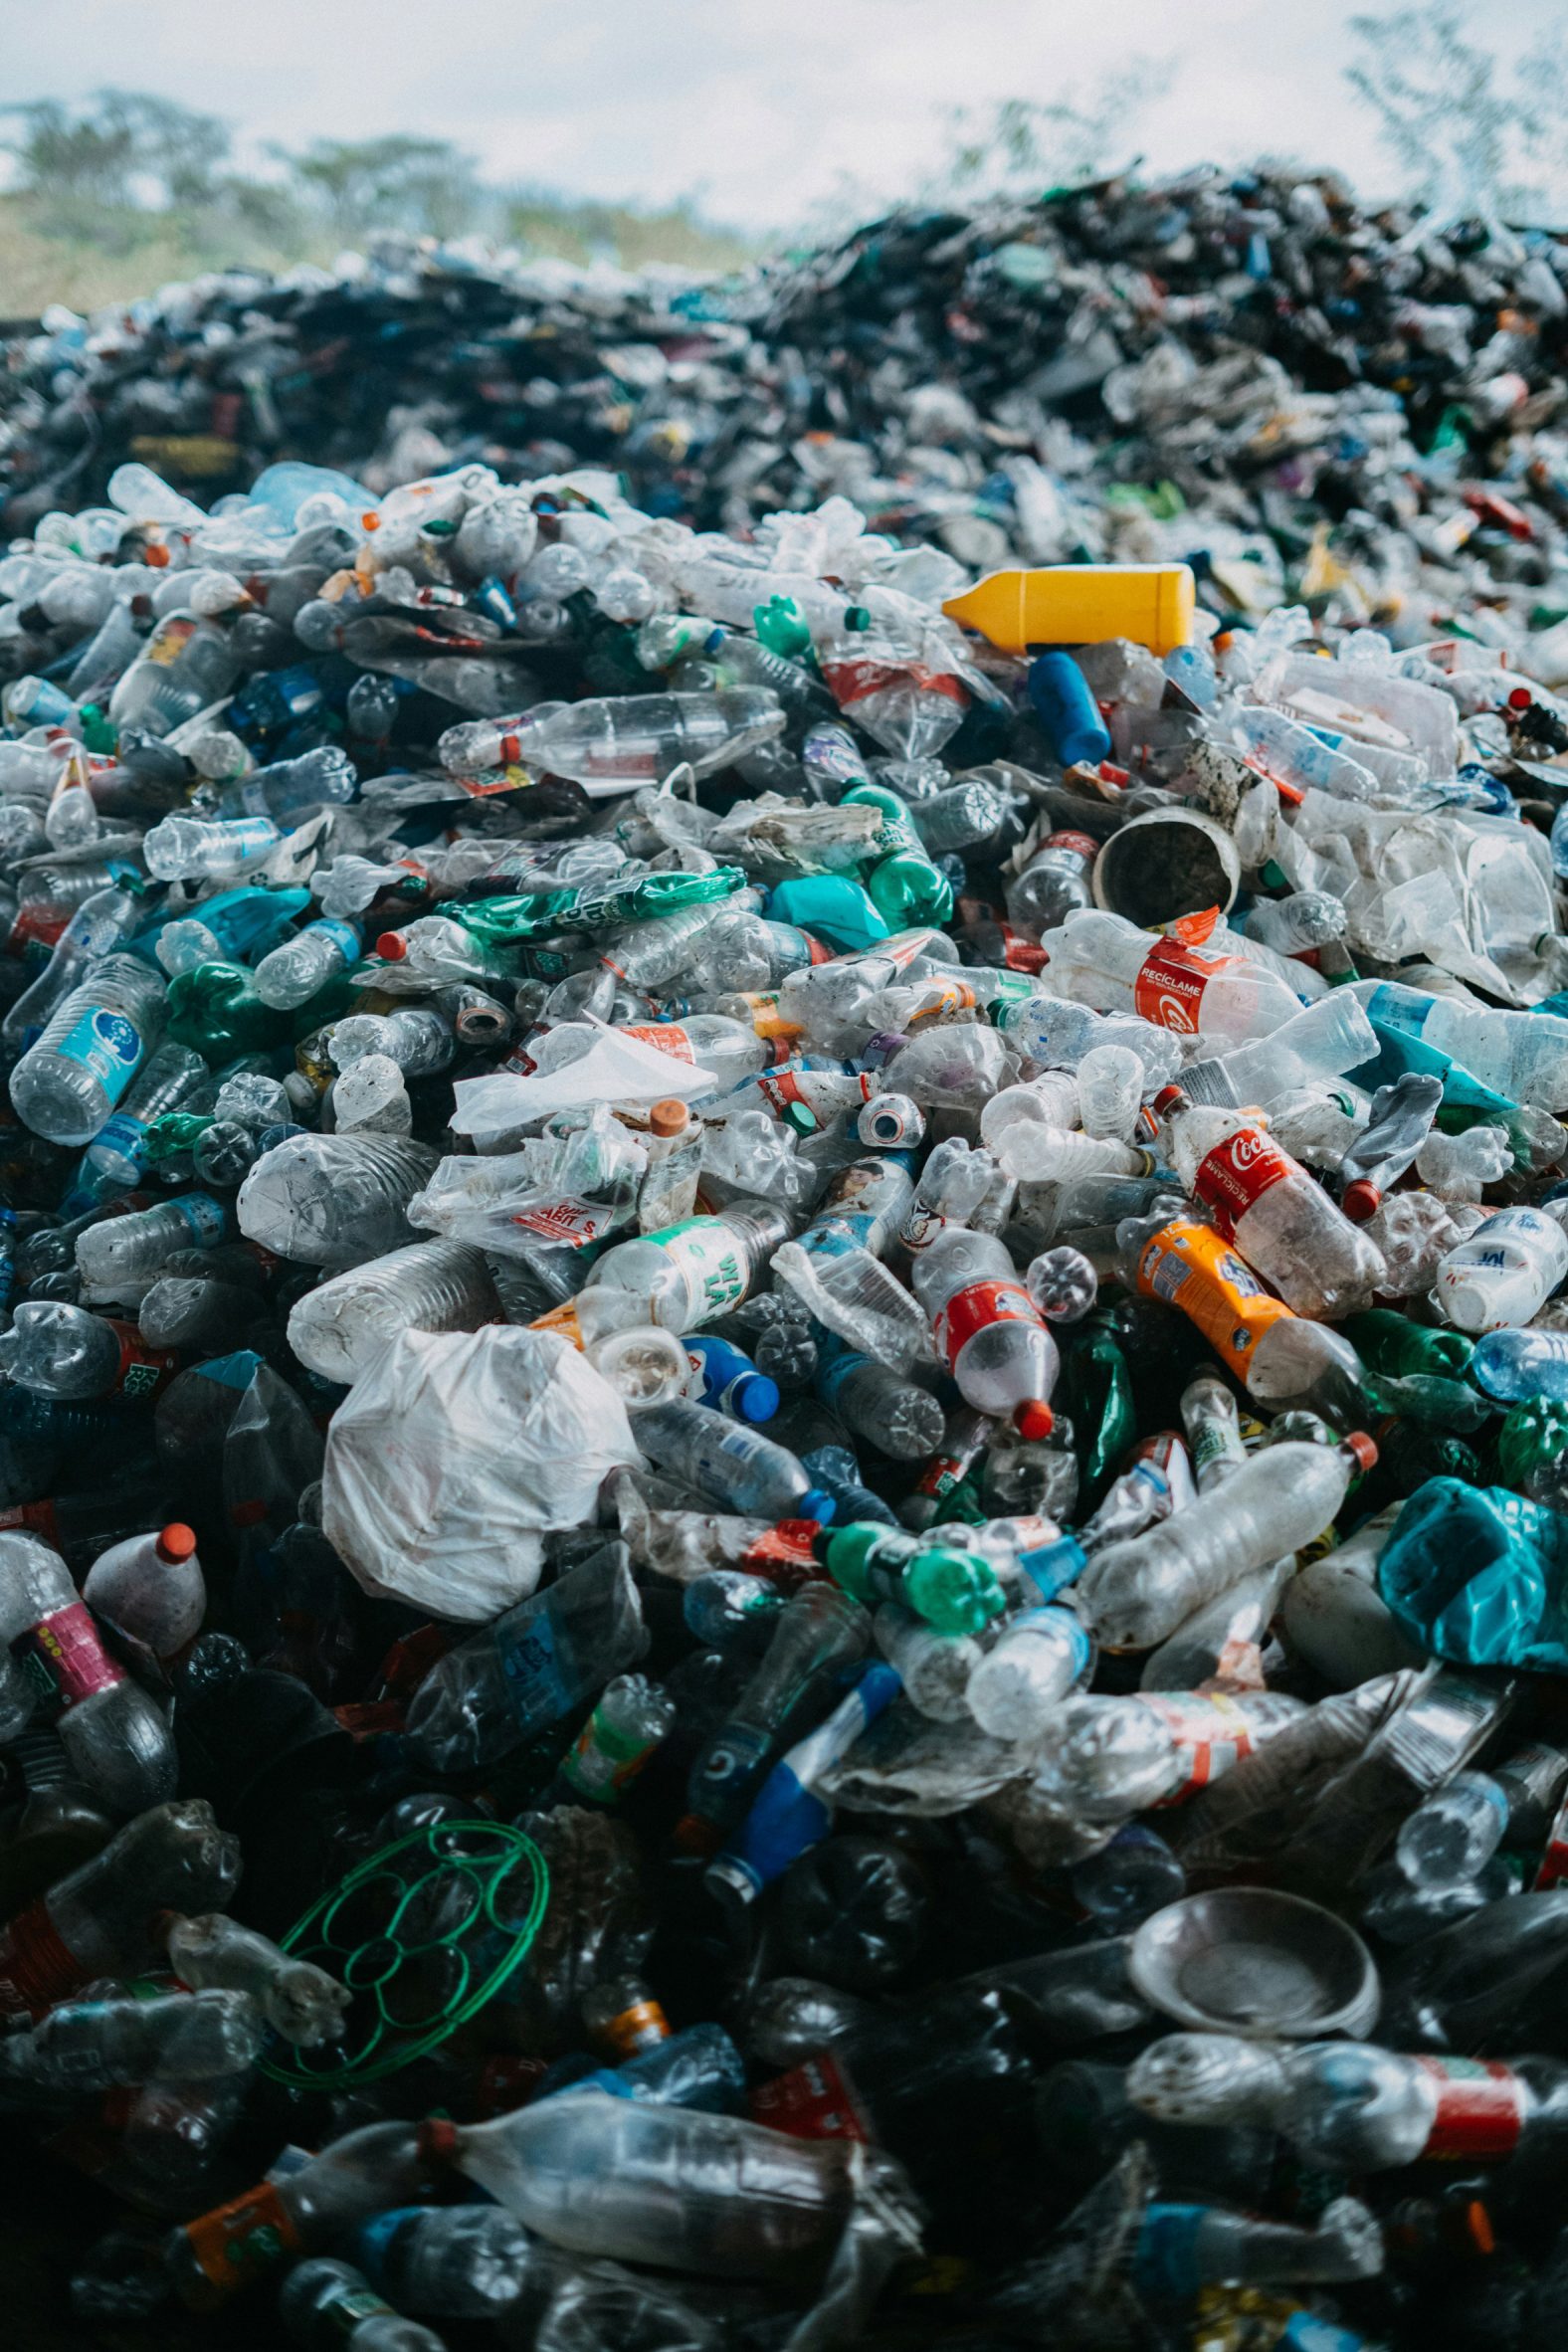 Photo of a large pile of plastic bottles and cans at a recycling facility in Santiago de los Caballeros, Dominican Republic